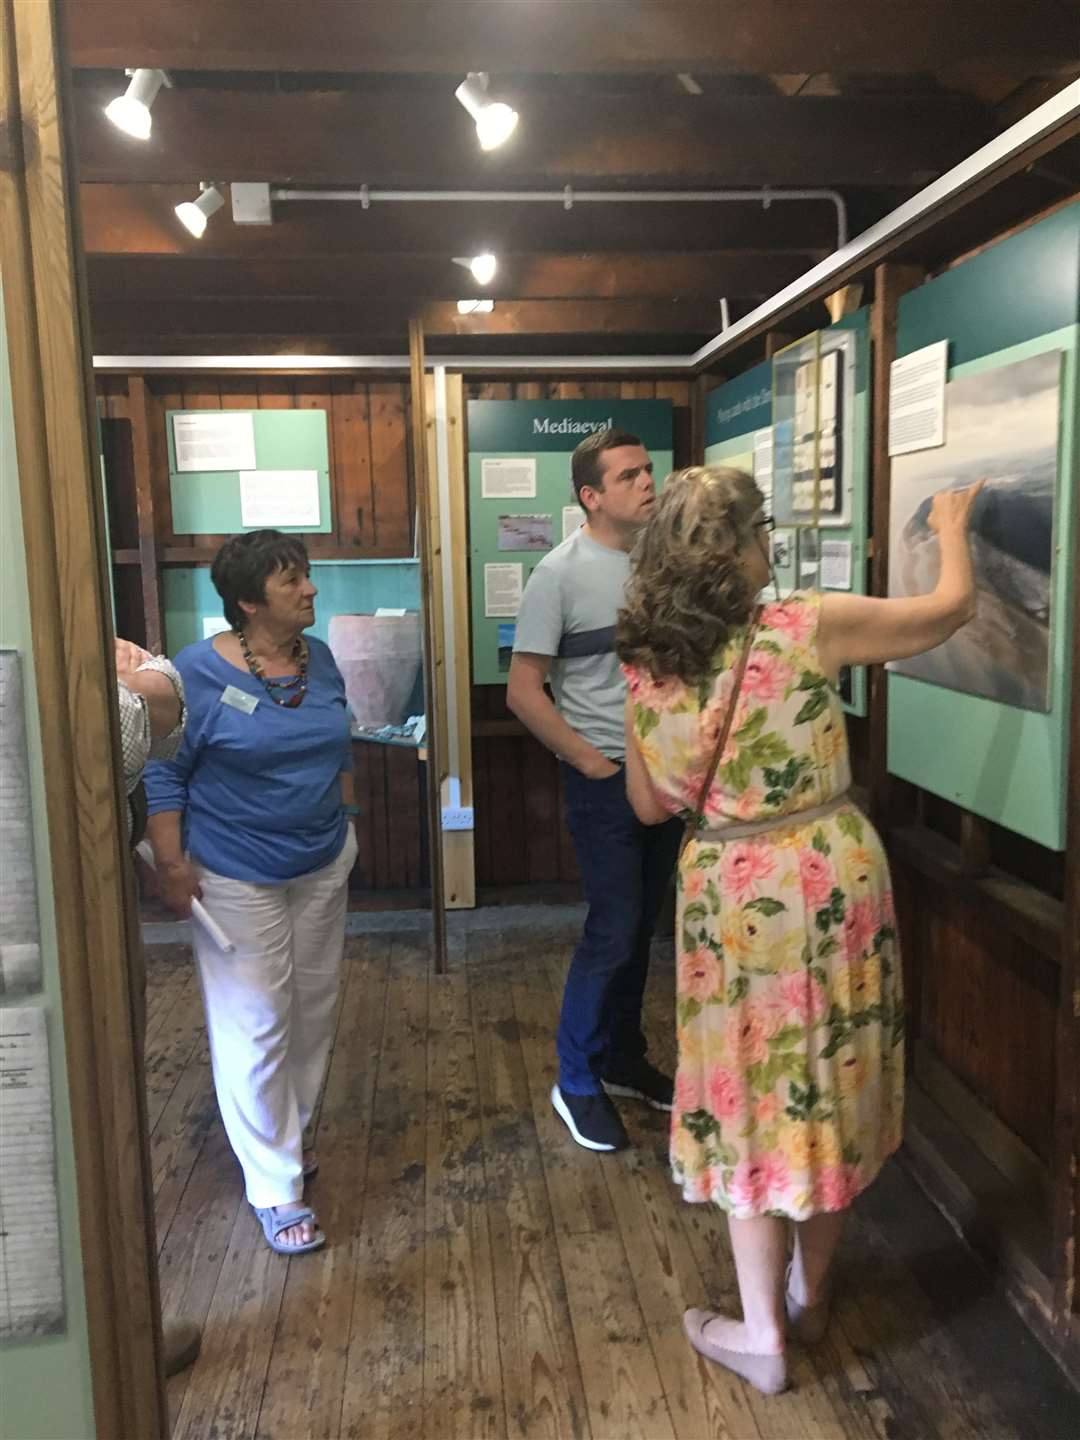 Douglas Ross MP being shown around the heritage centre by volunteers.